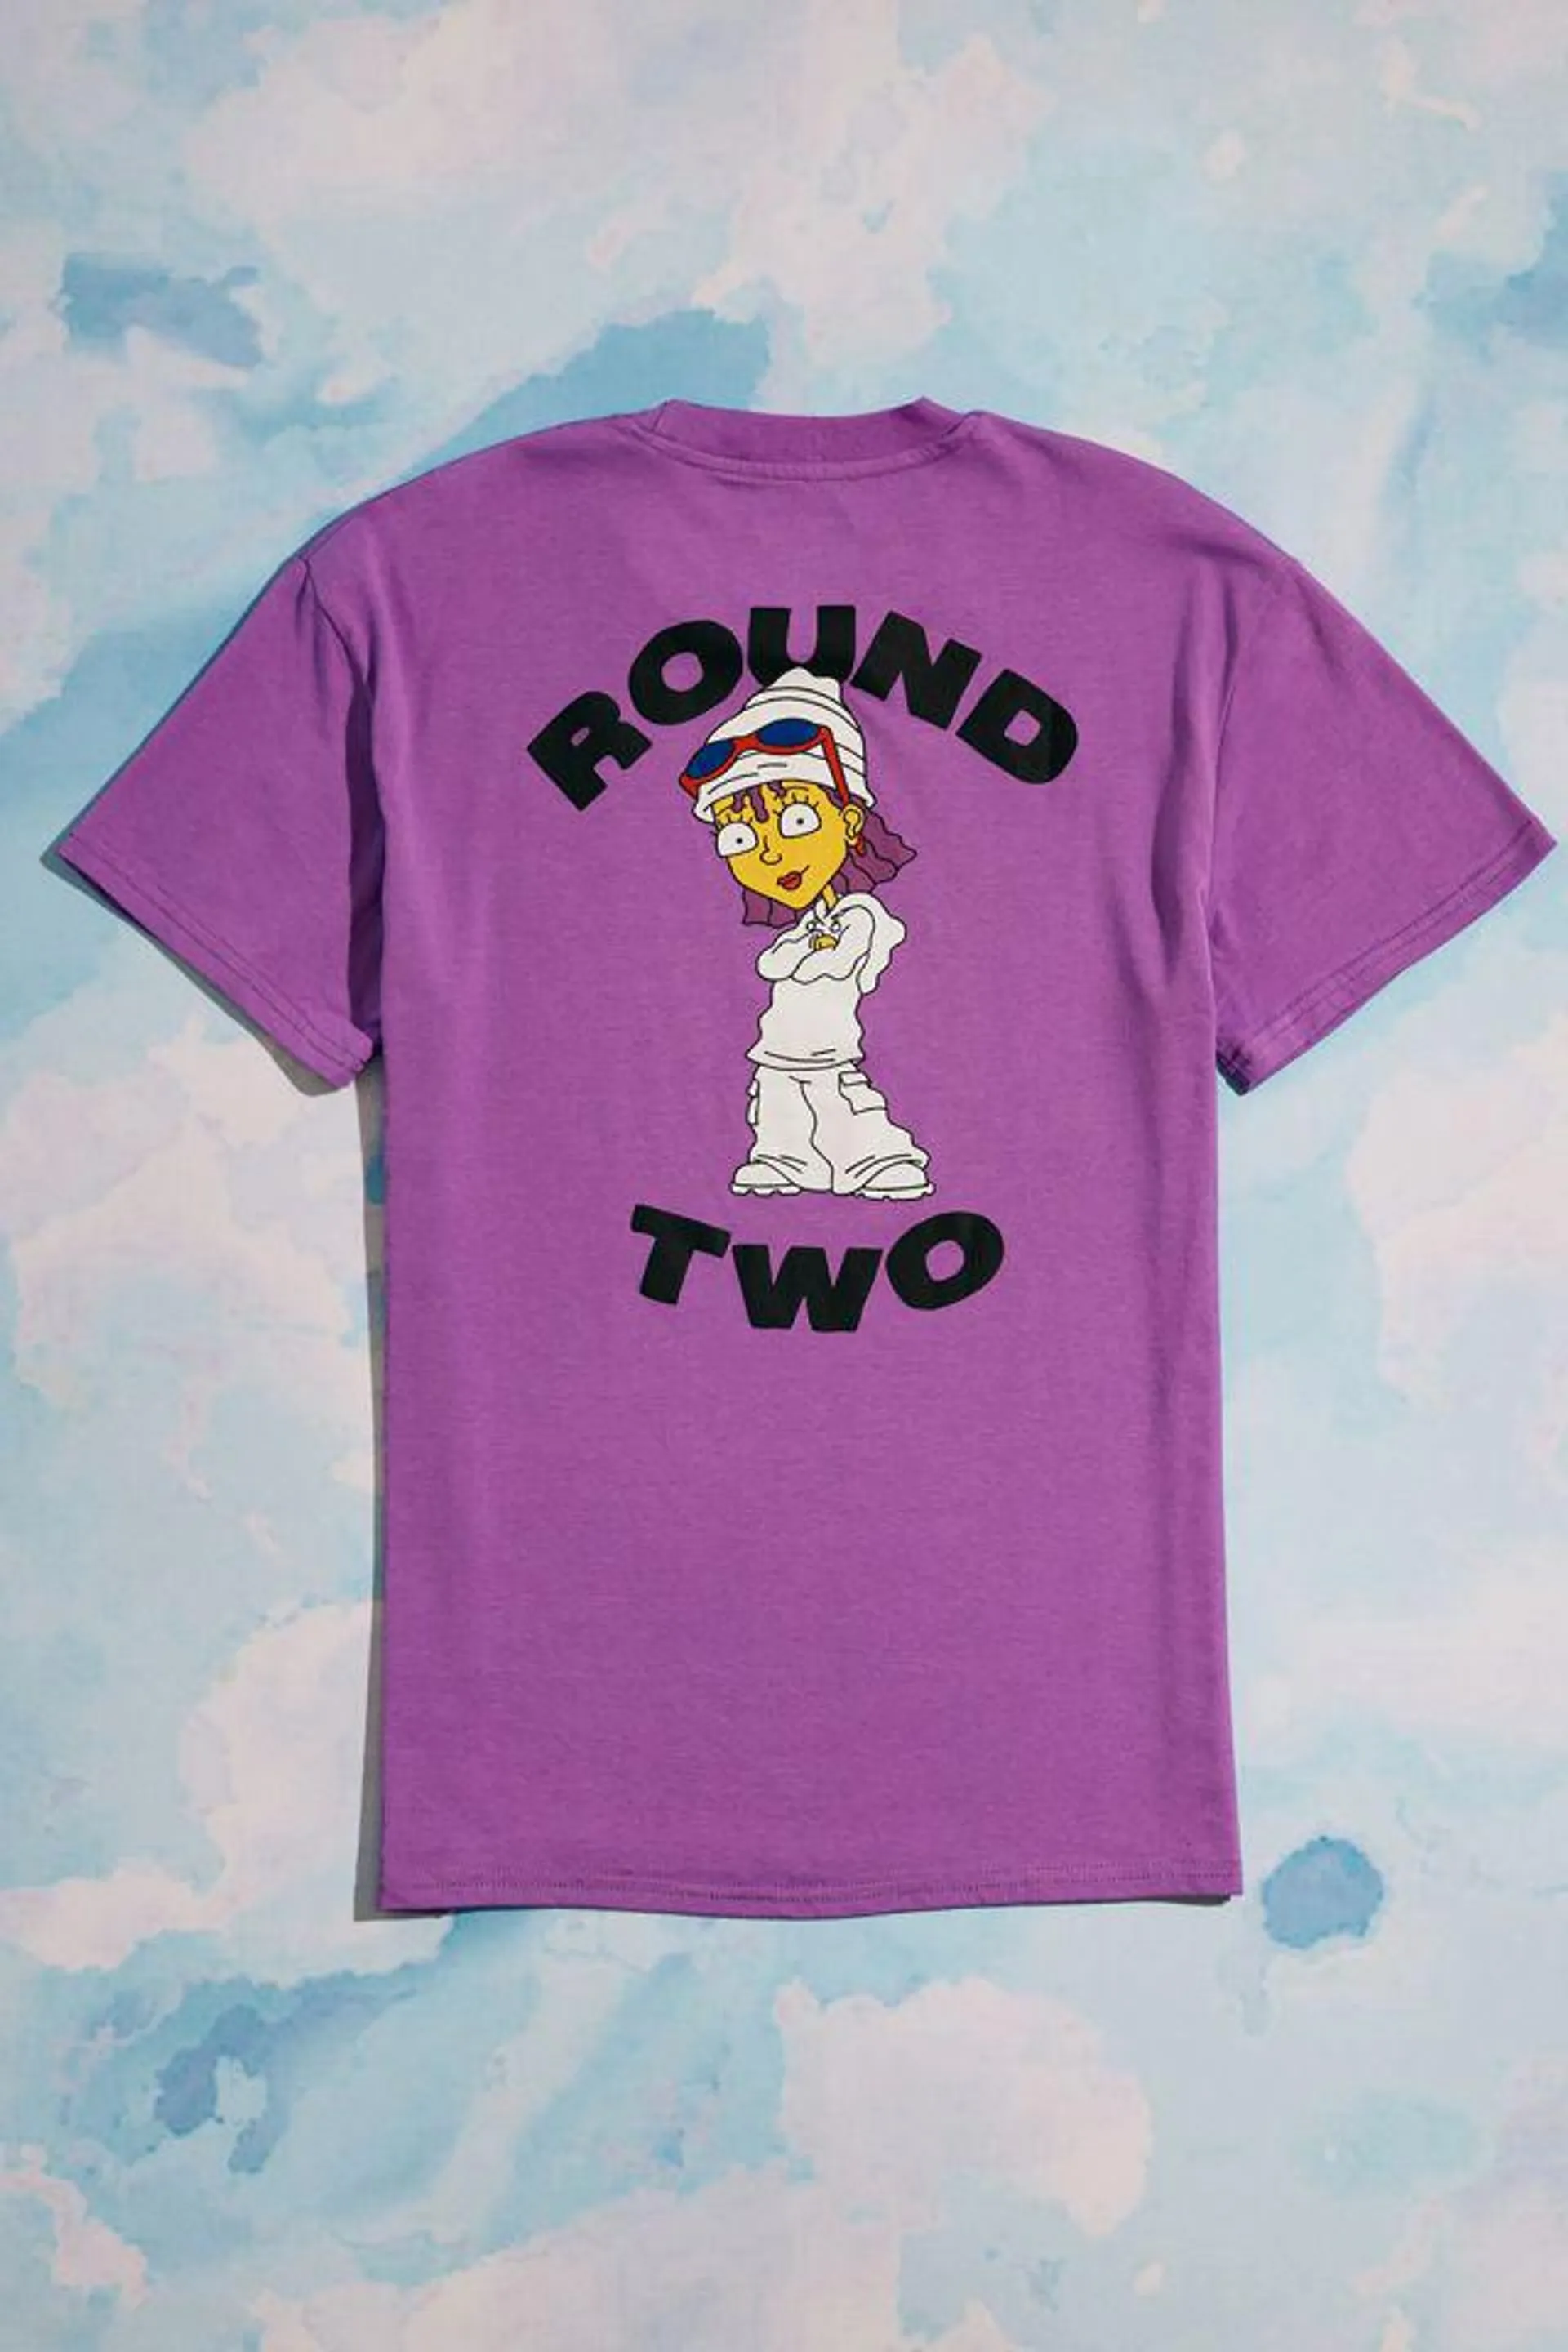 Round Two X Nickelodeon UO Exclusive Rocket Power Tee